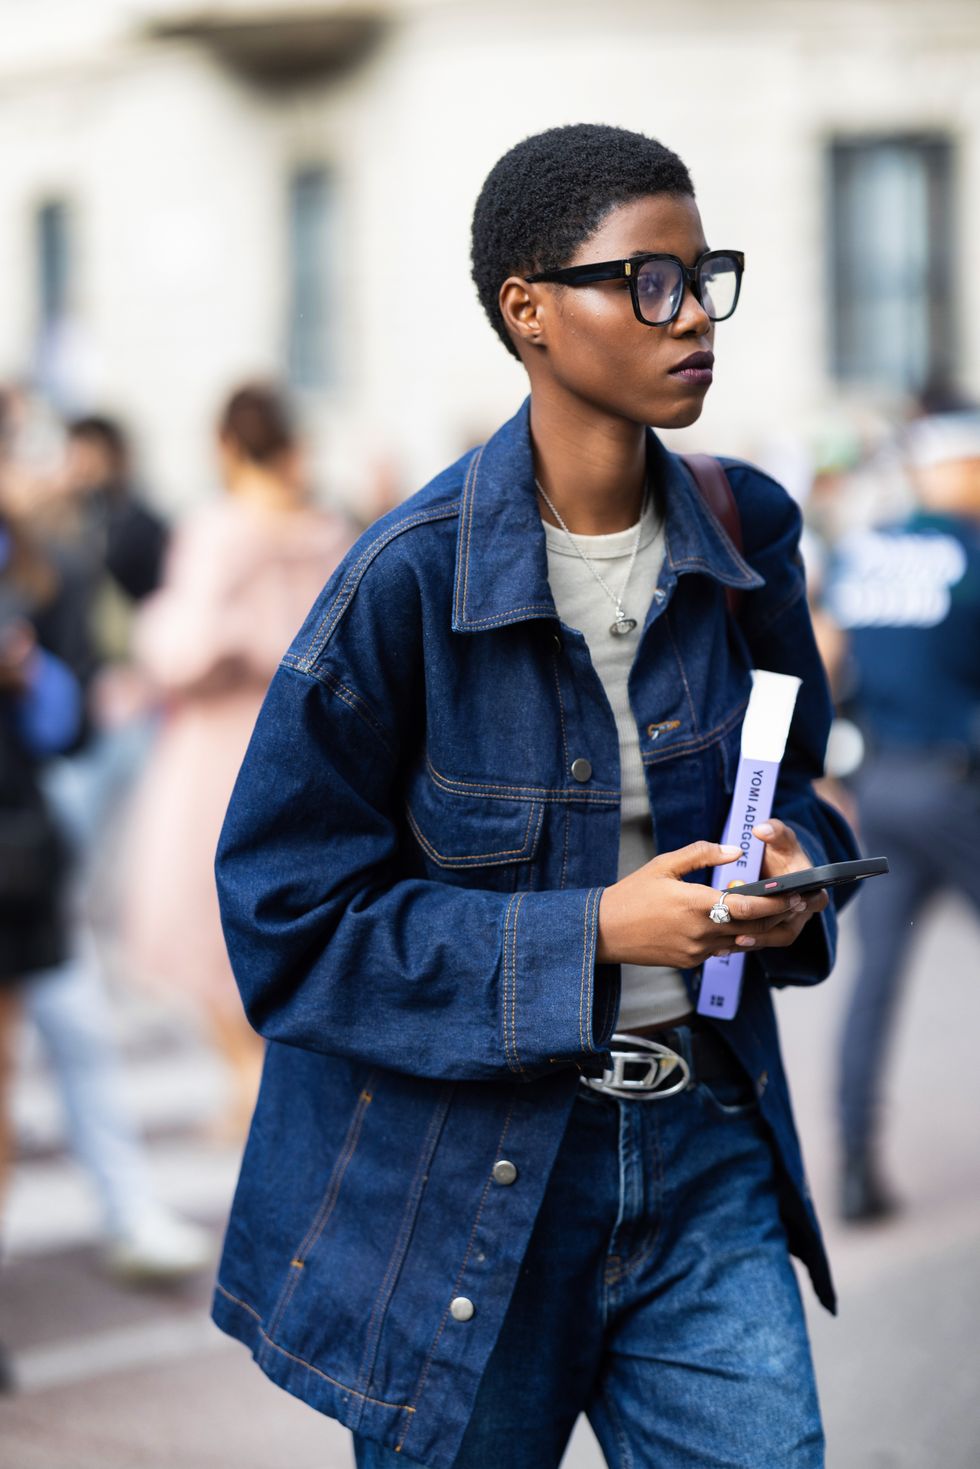 A model is seen wearing black glasses, a white tank-top, a blue jeans oversized jacket, a silver and black Diesel belt and blue jeans outside the Max Mara show during the Milan Fashion Week